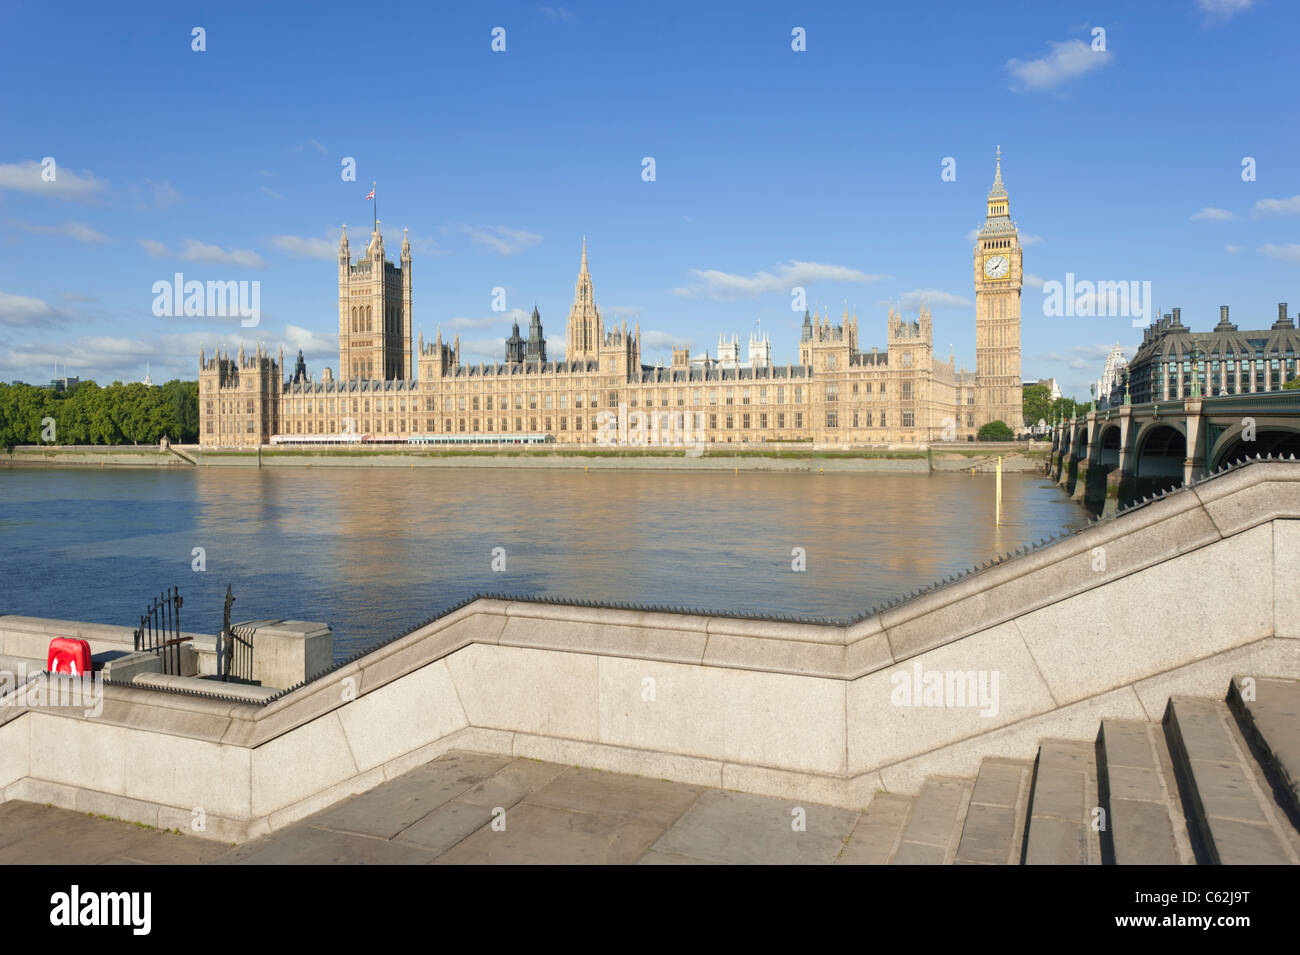 The Houses of Parliament in London, England, UK, beside the River Thames. As seen from the opposite bank. Stock Photo